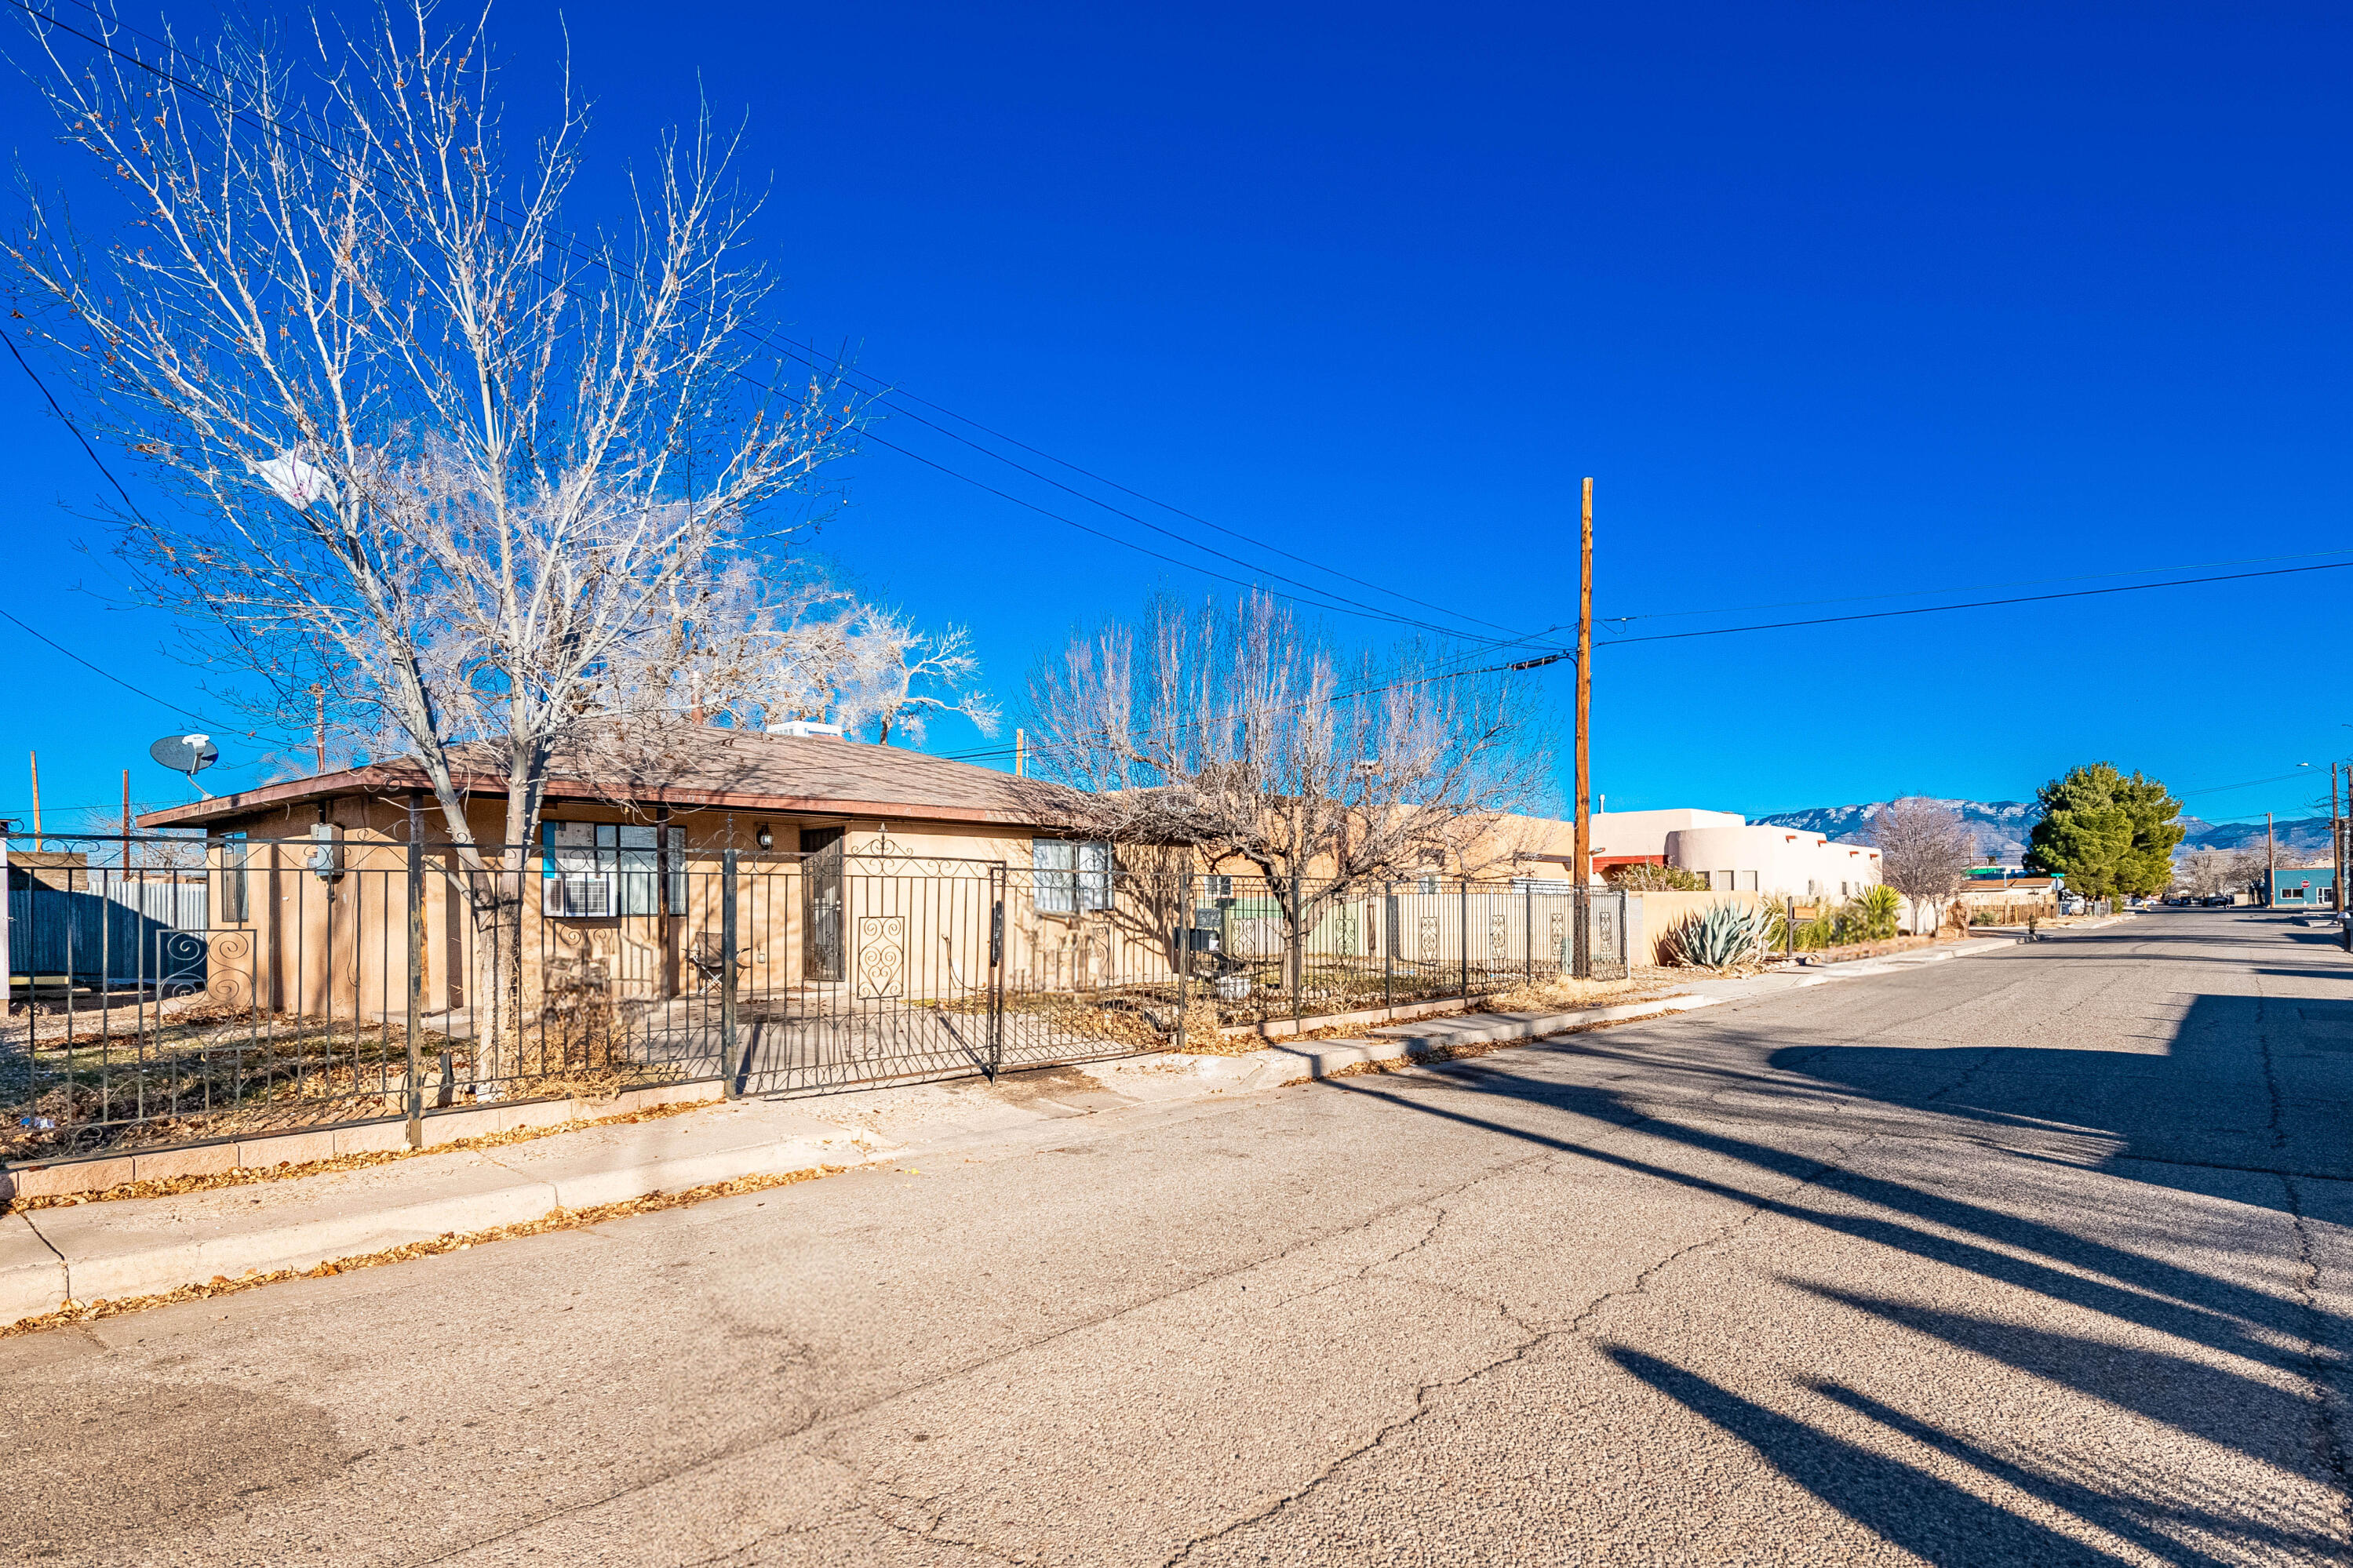 509 Bellrose Avenue NW, Albuquerque, New Mexico 87107, 2 Bedrooms Bedrooms, ,1 BathroomBathrooms,Residential,For Sale,509 Bellrose Avenue NW,1054796